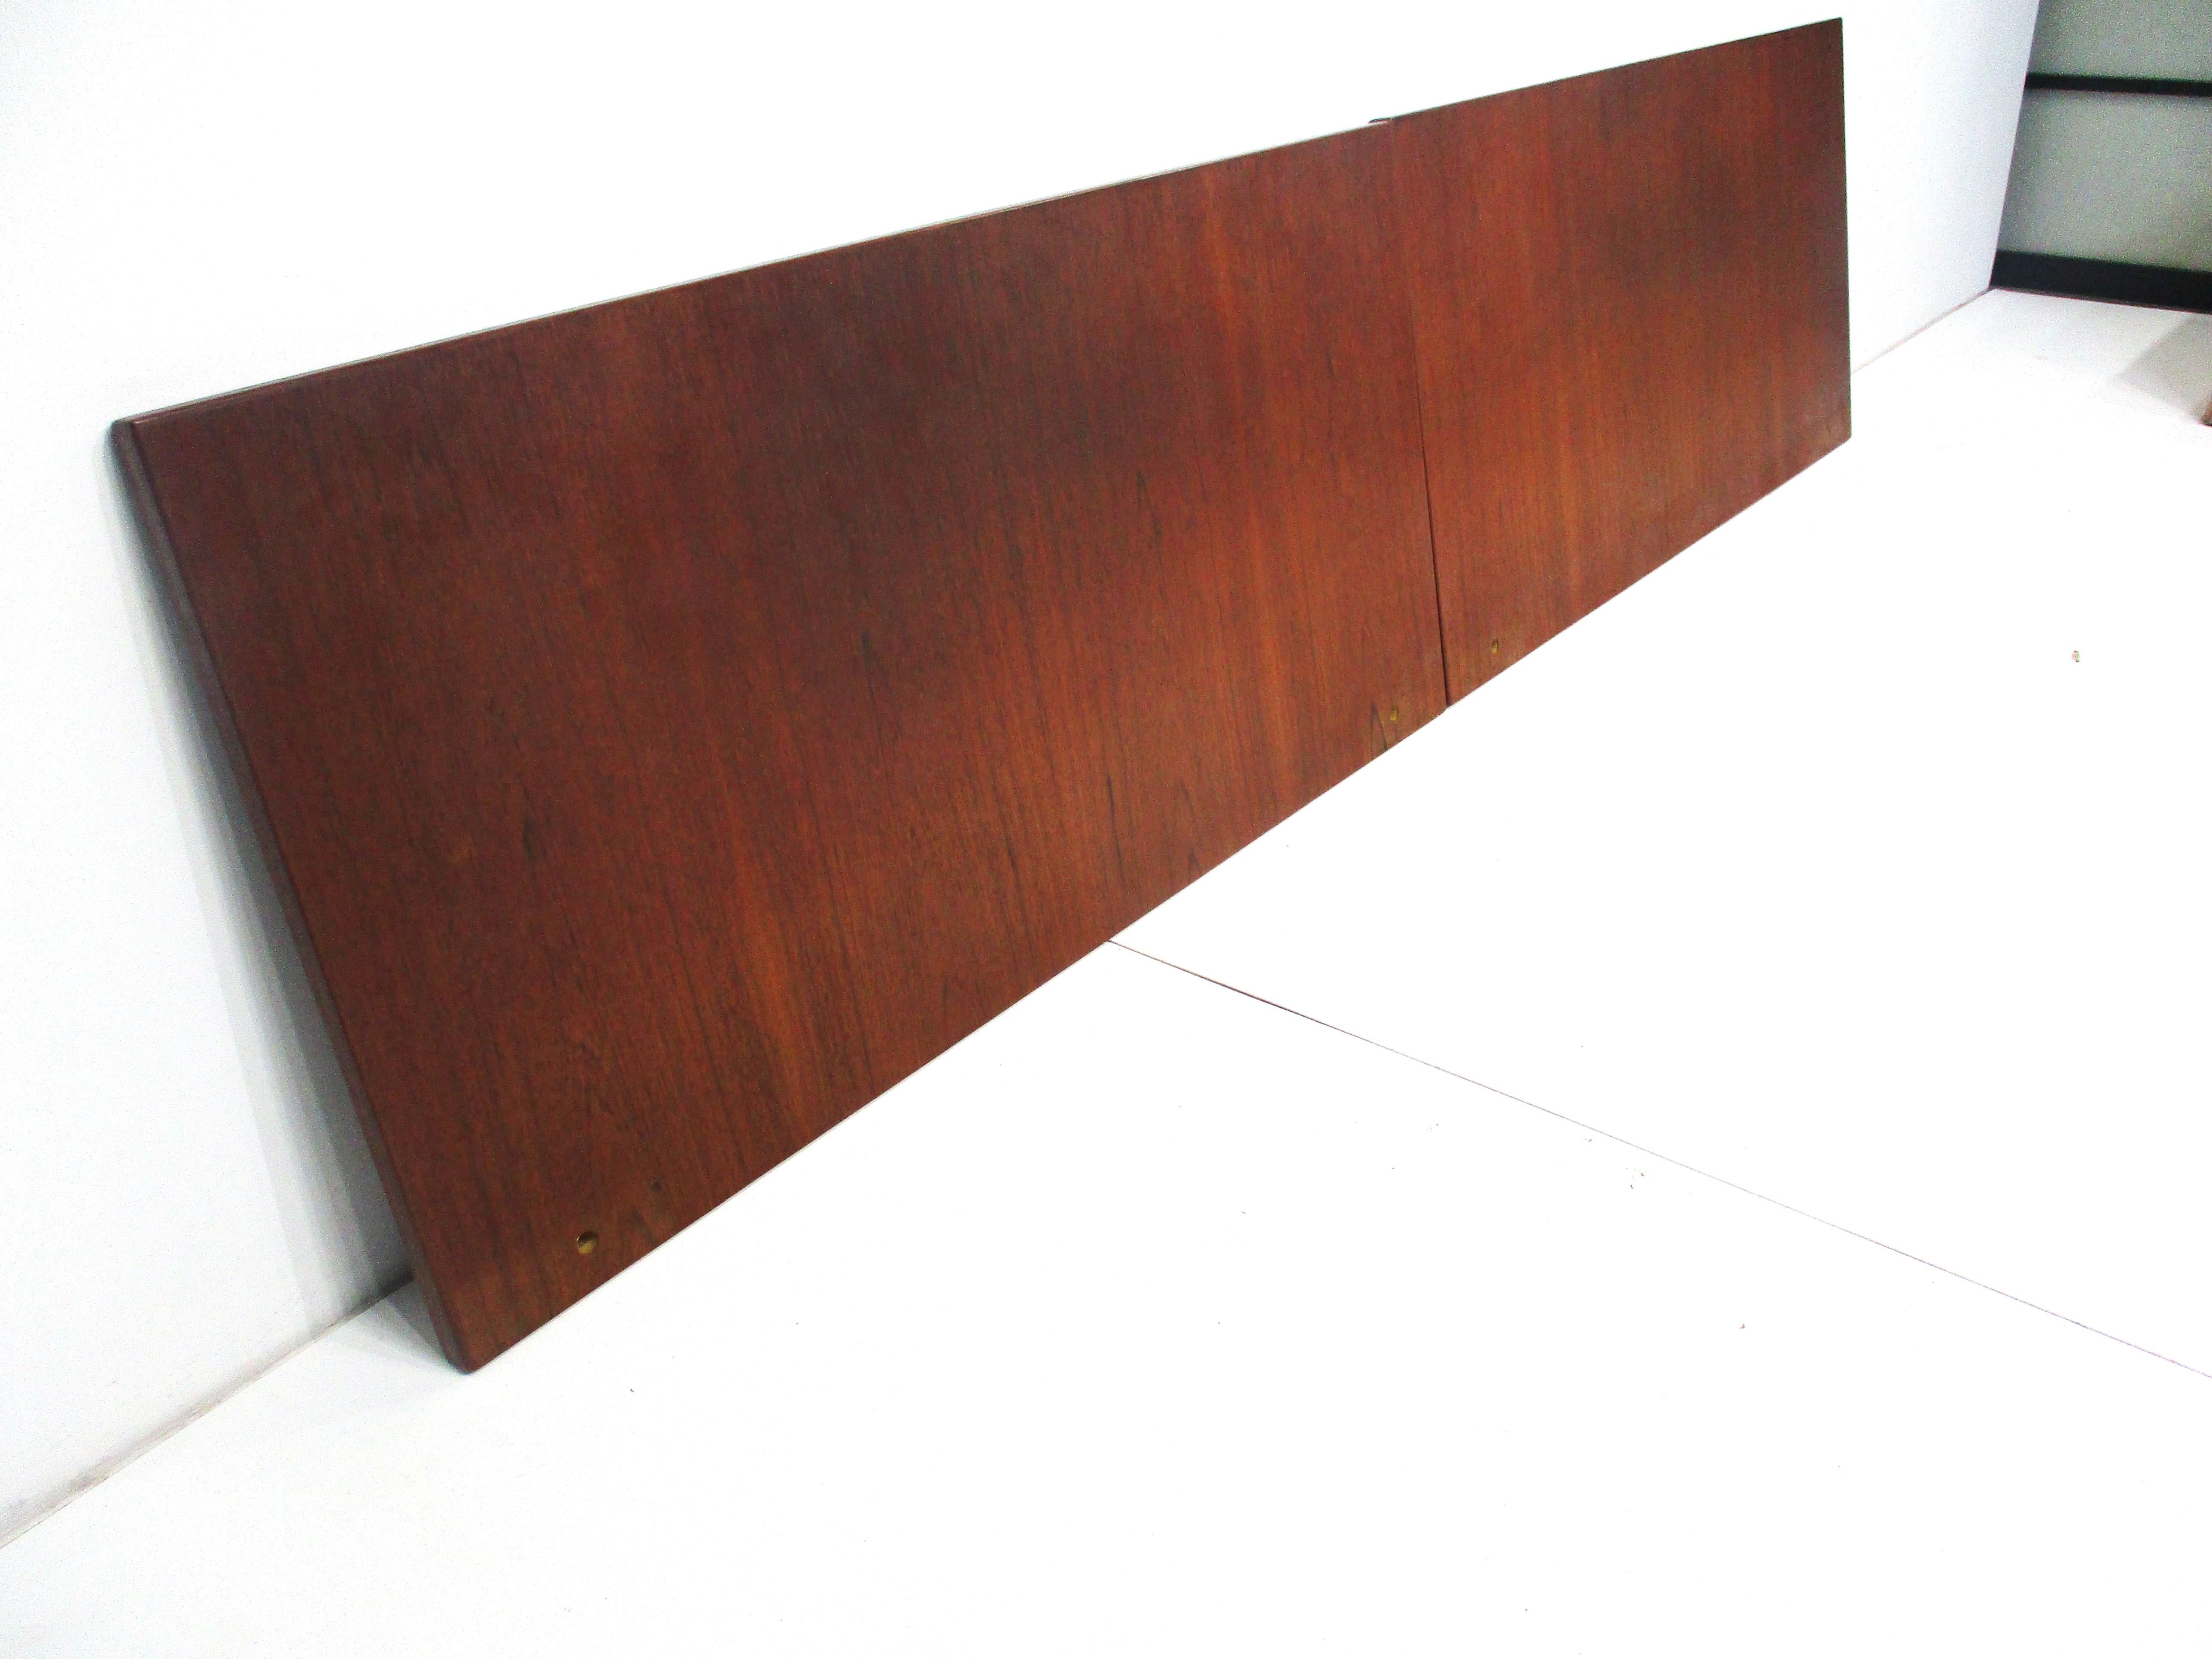 A teak two piece king sized Danish headboard , mounts to the back of the bed frames , platform or wall with four cast steel L brackets which are included . Ordered in 1962 by the former owner directly at the Povl Dinesen showroom in Copenhagen which